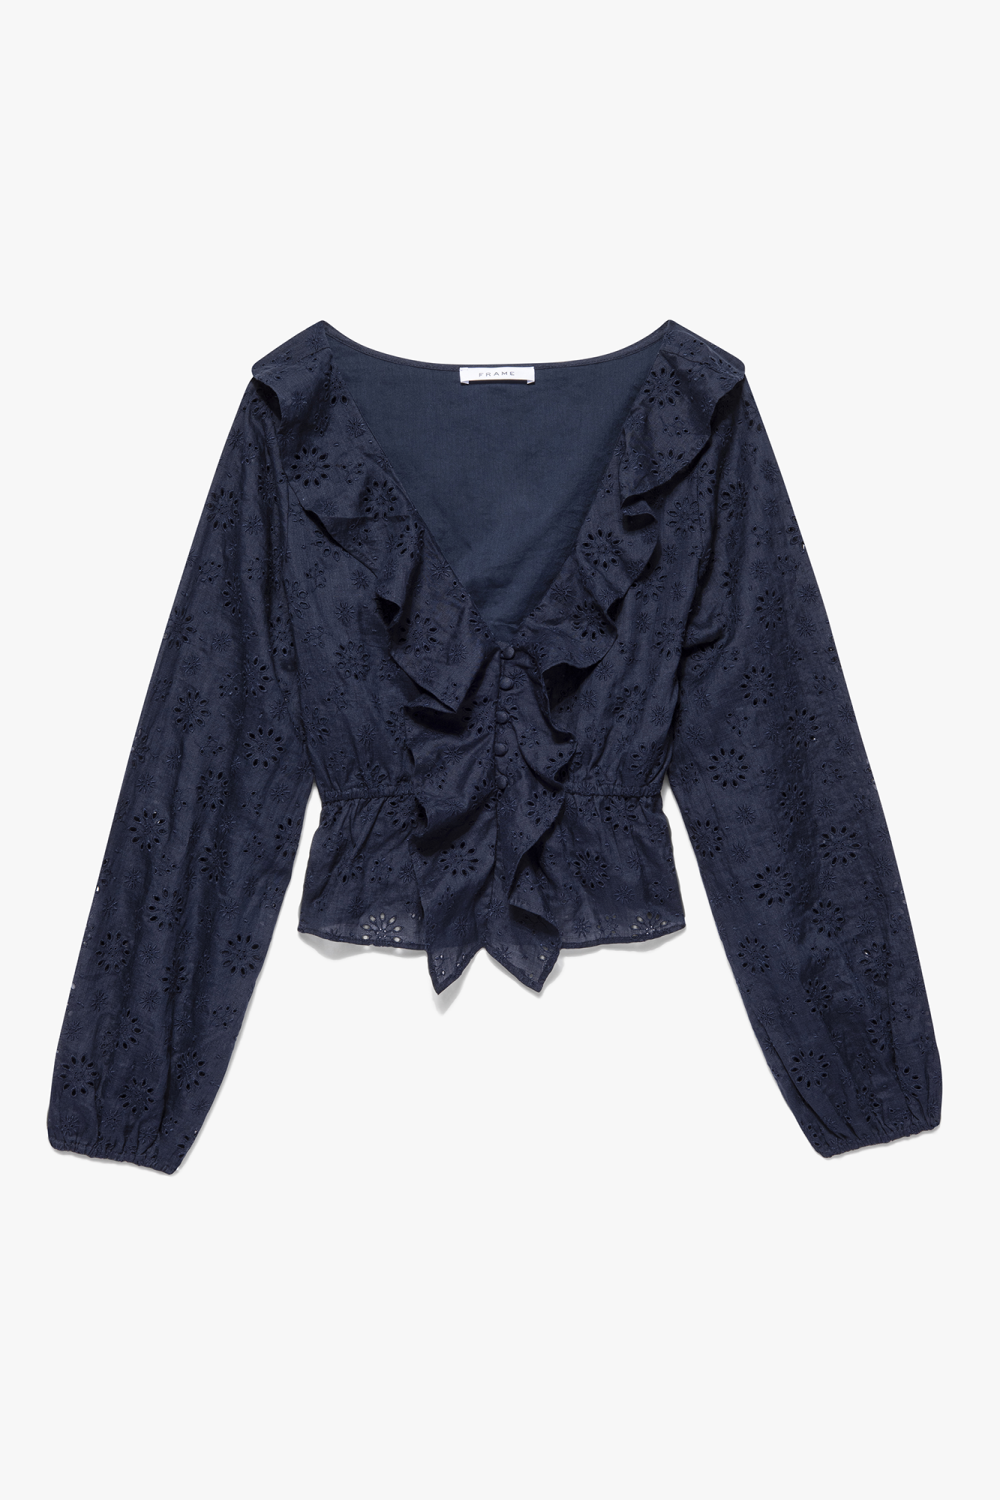 Ruffle Front Eyelet Long Sleeve Top from Frame airy blouse is embroidered with bespoke eyelet detailing, and finished with a feminine front ruffle.